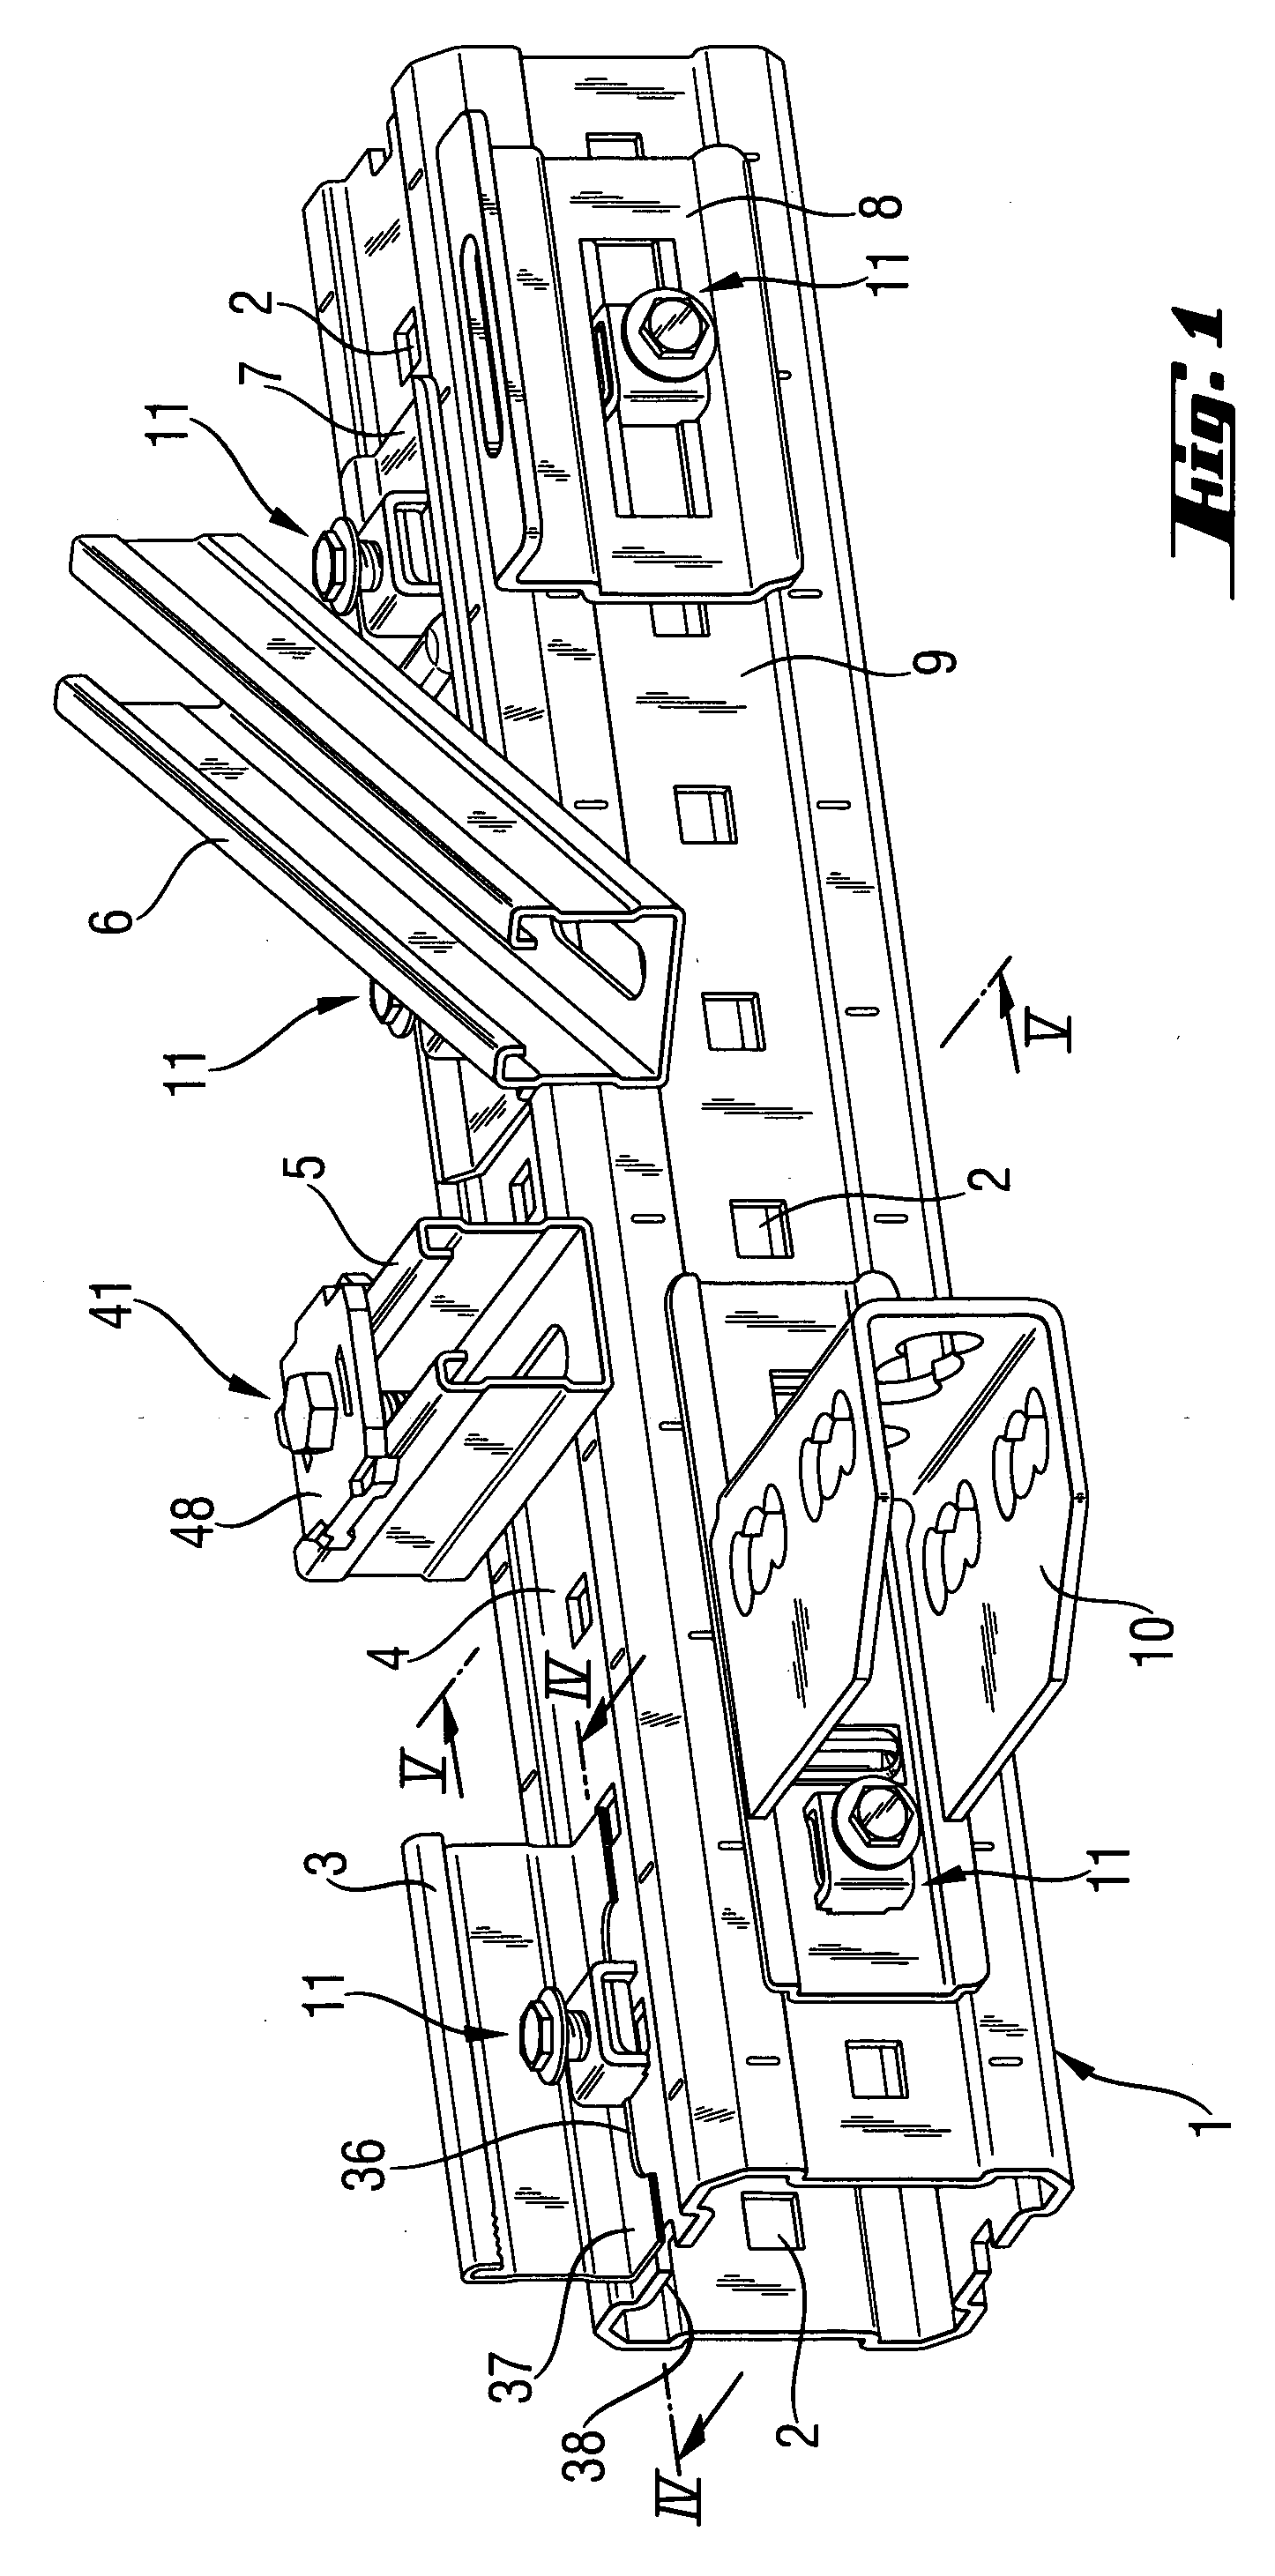 Attachment system